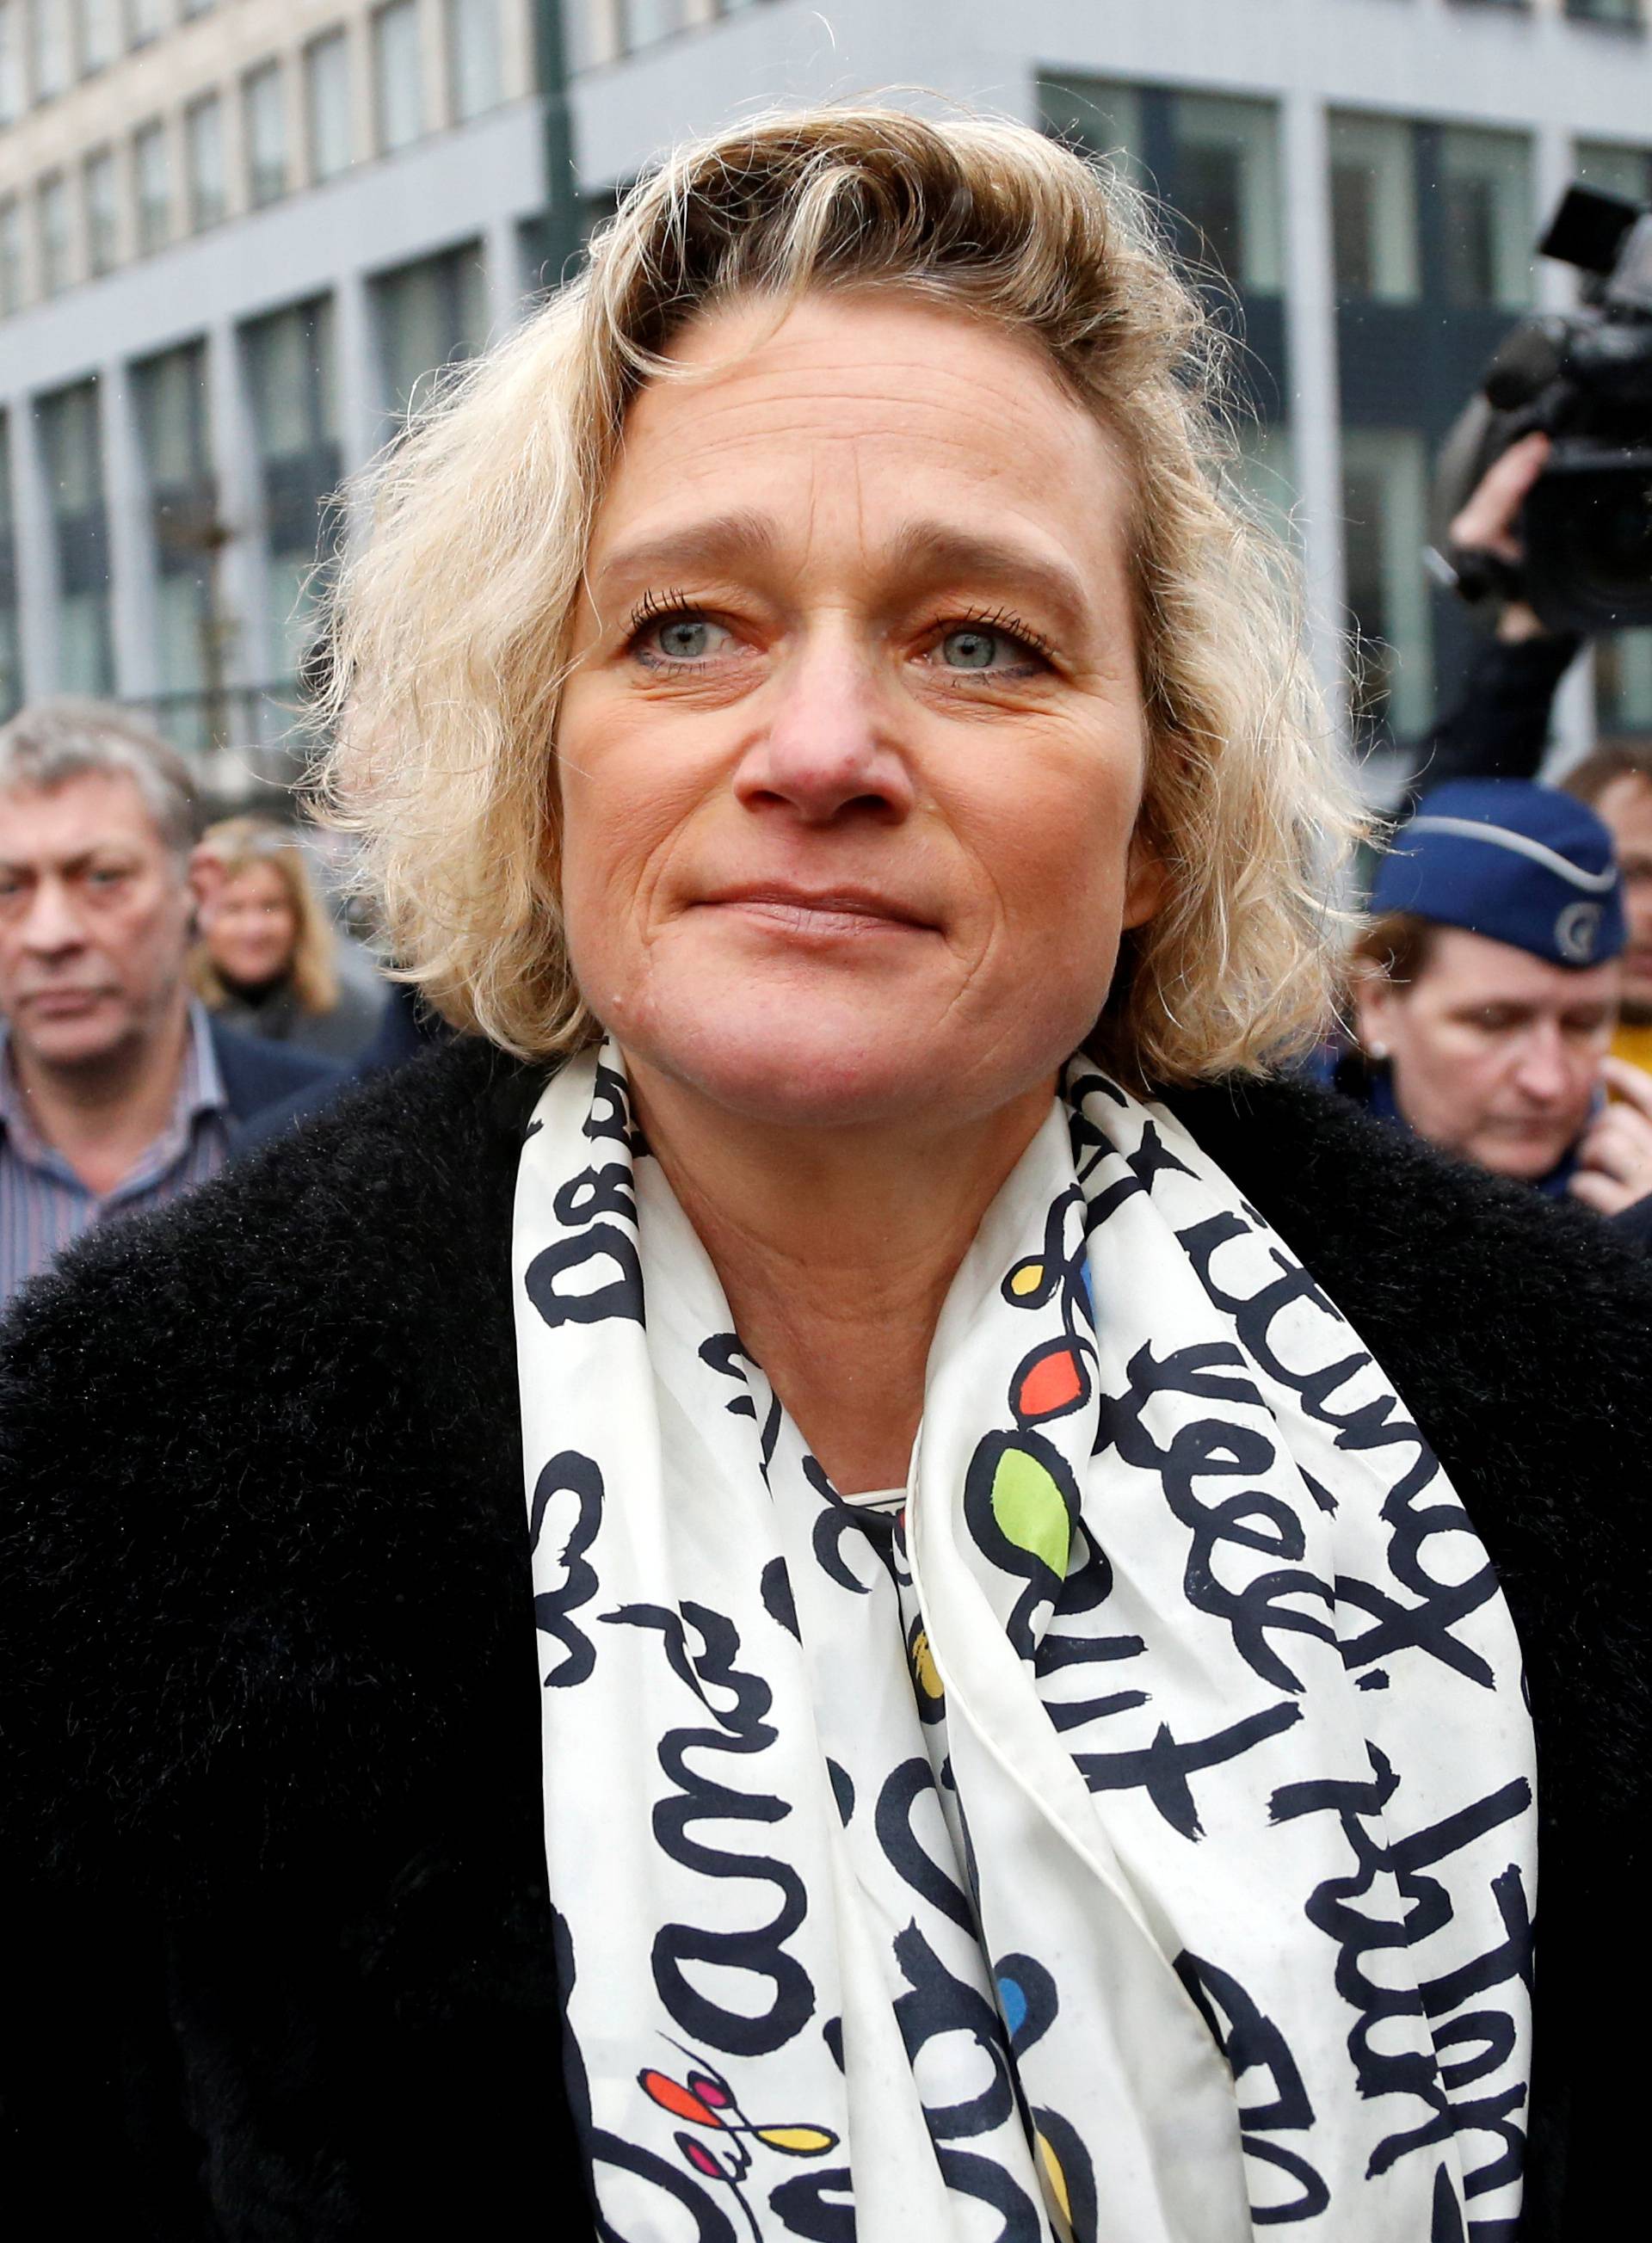 FILE PHOTO: Belgian artist Boel leaves a courthouse in Belgium